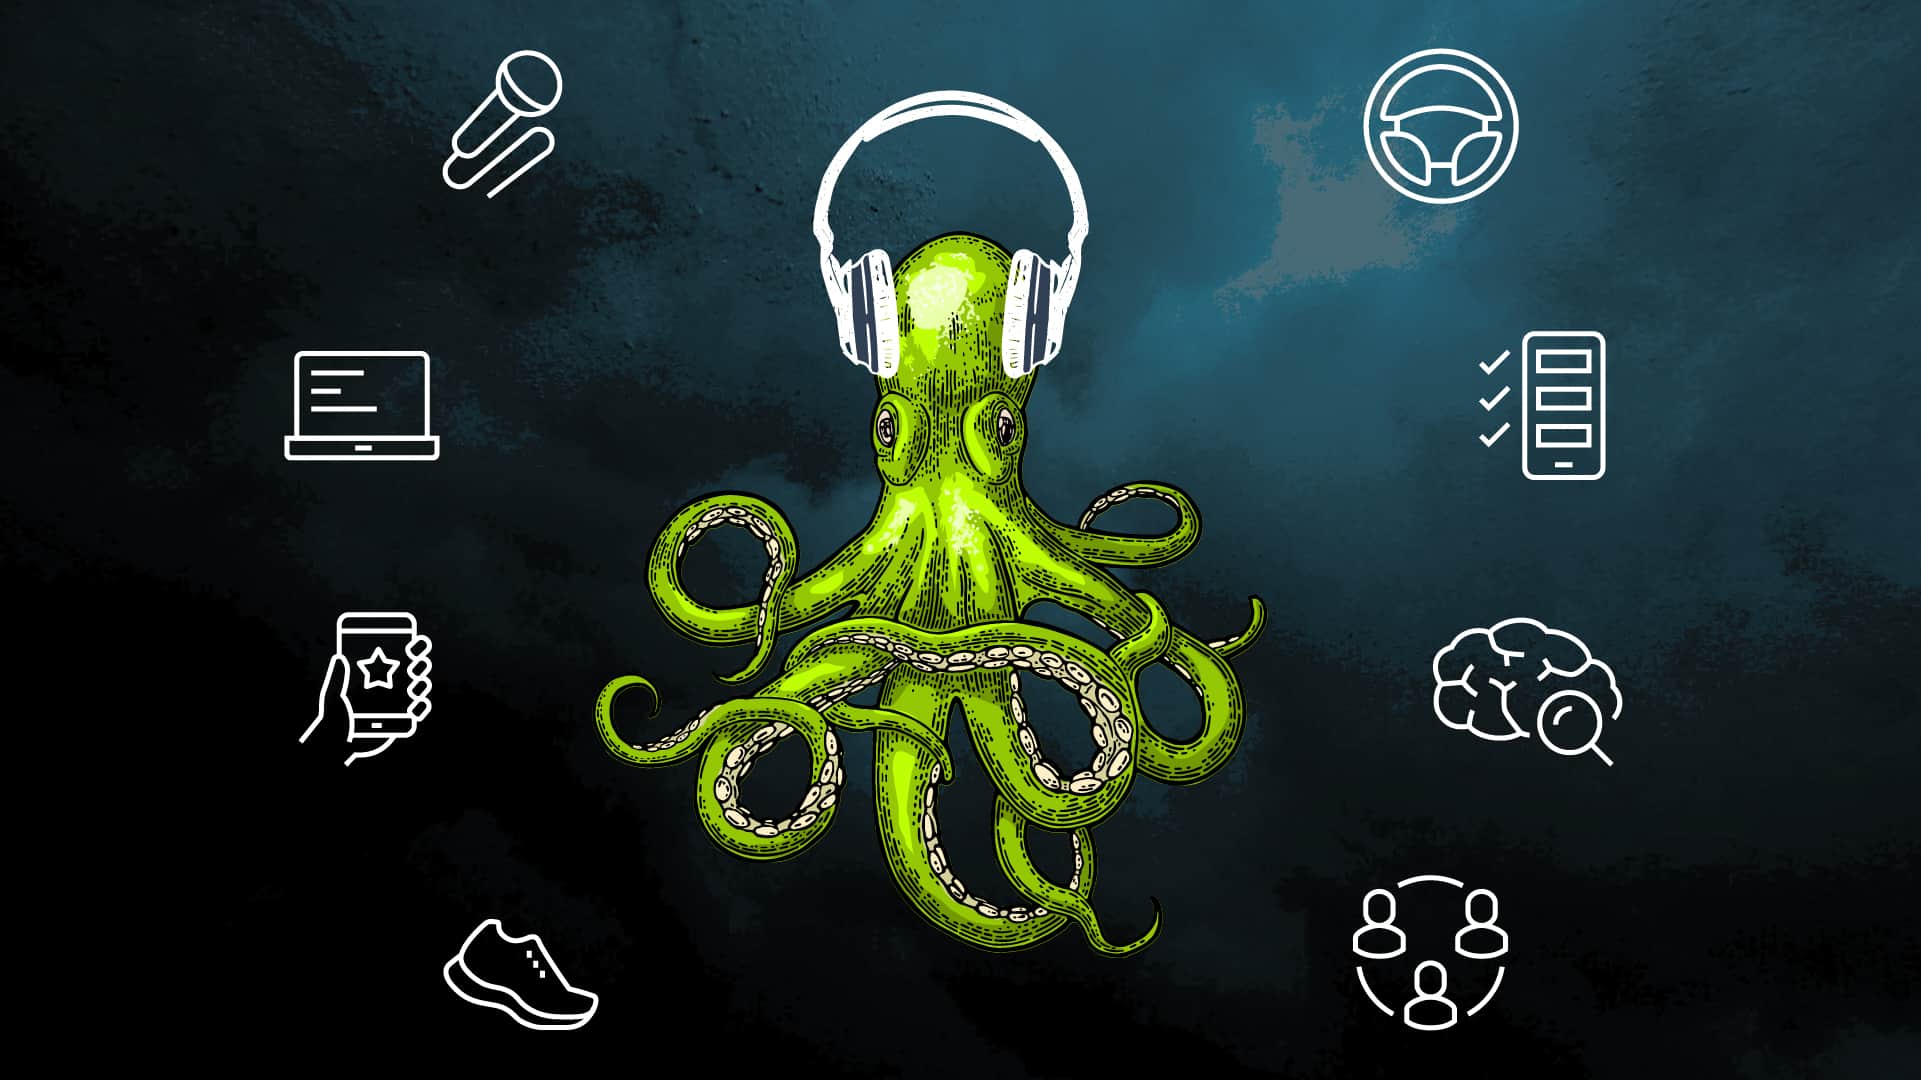 image of an octopus with headphones